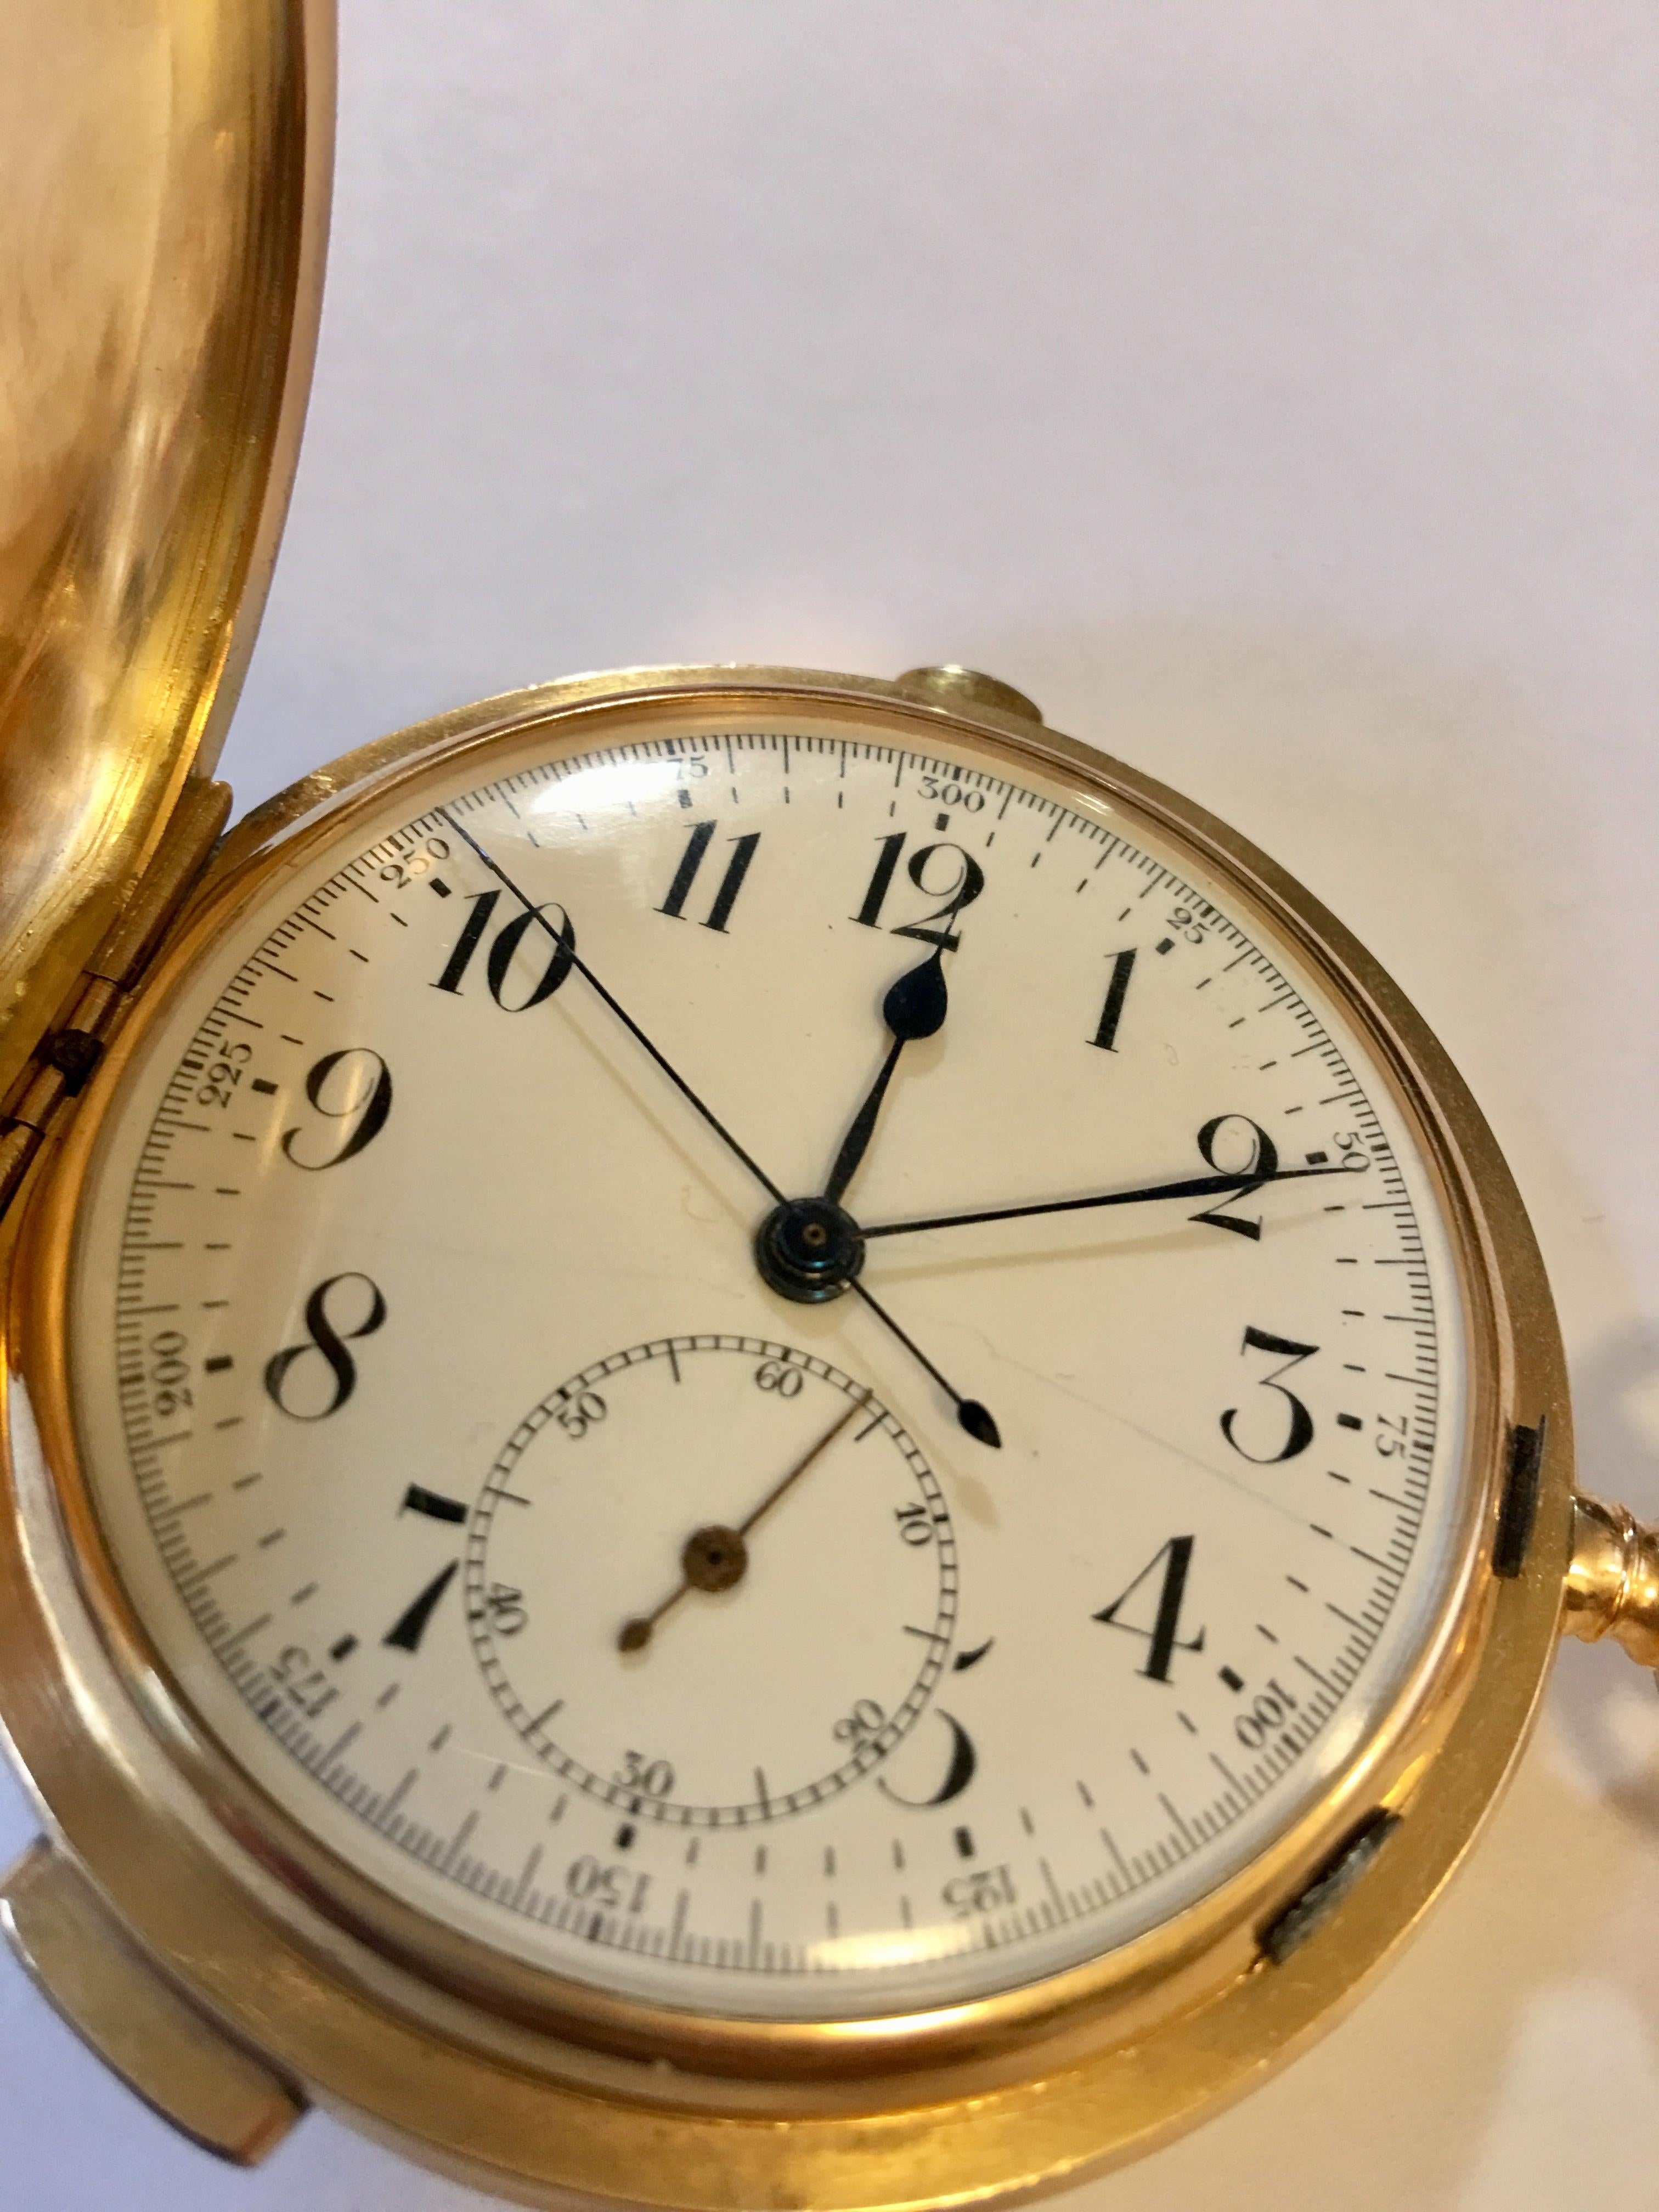 Heavy high grade Swiss made full hunter 18-karat gold minute repeater pocket watch. This superb watch has a white enamel dial with Roman numerals and a seconds subdial. Minute track and outer 1/5th seconds division on one minute scale. The chimes